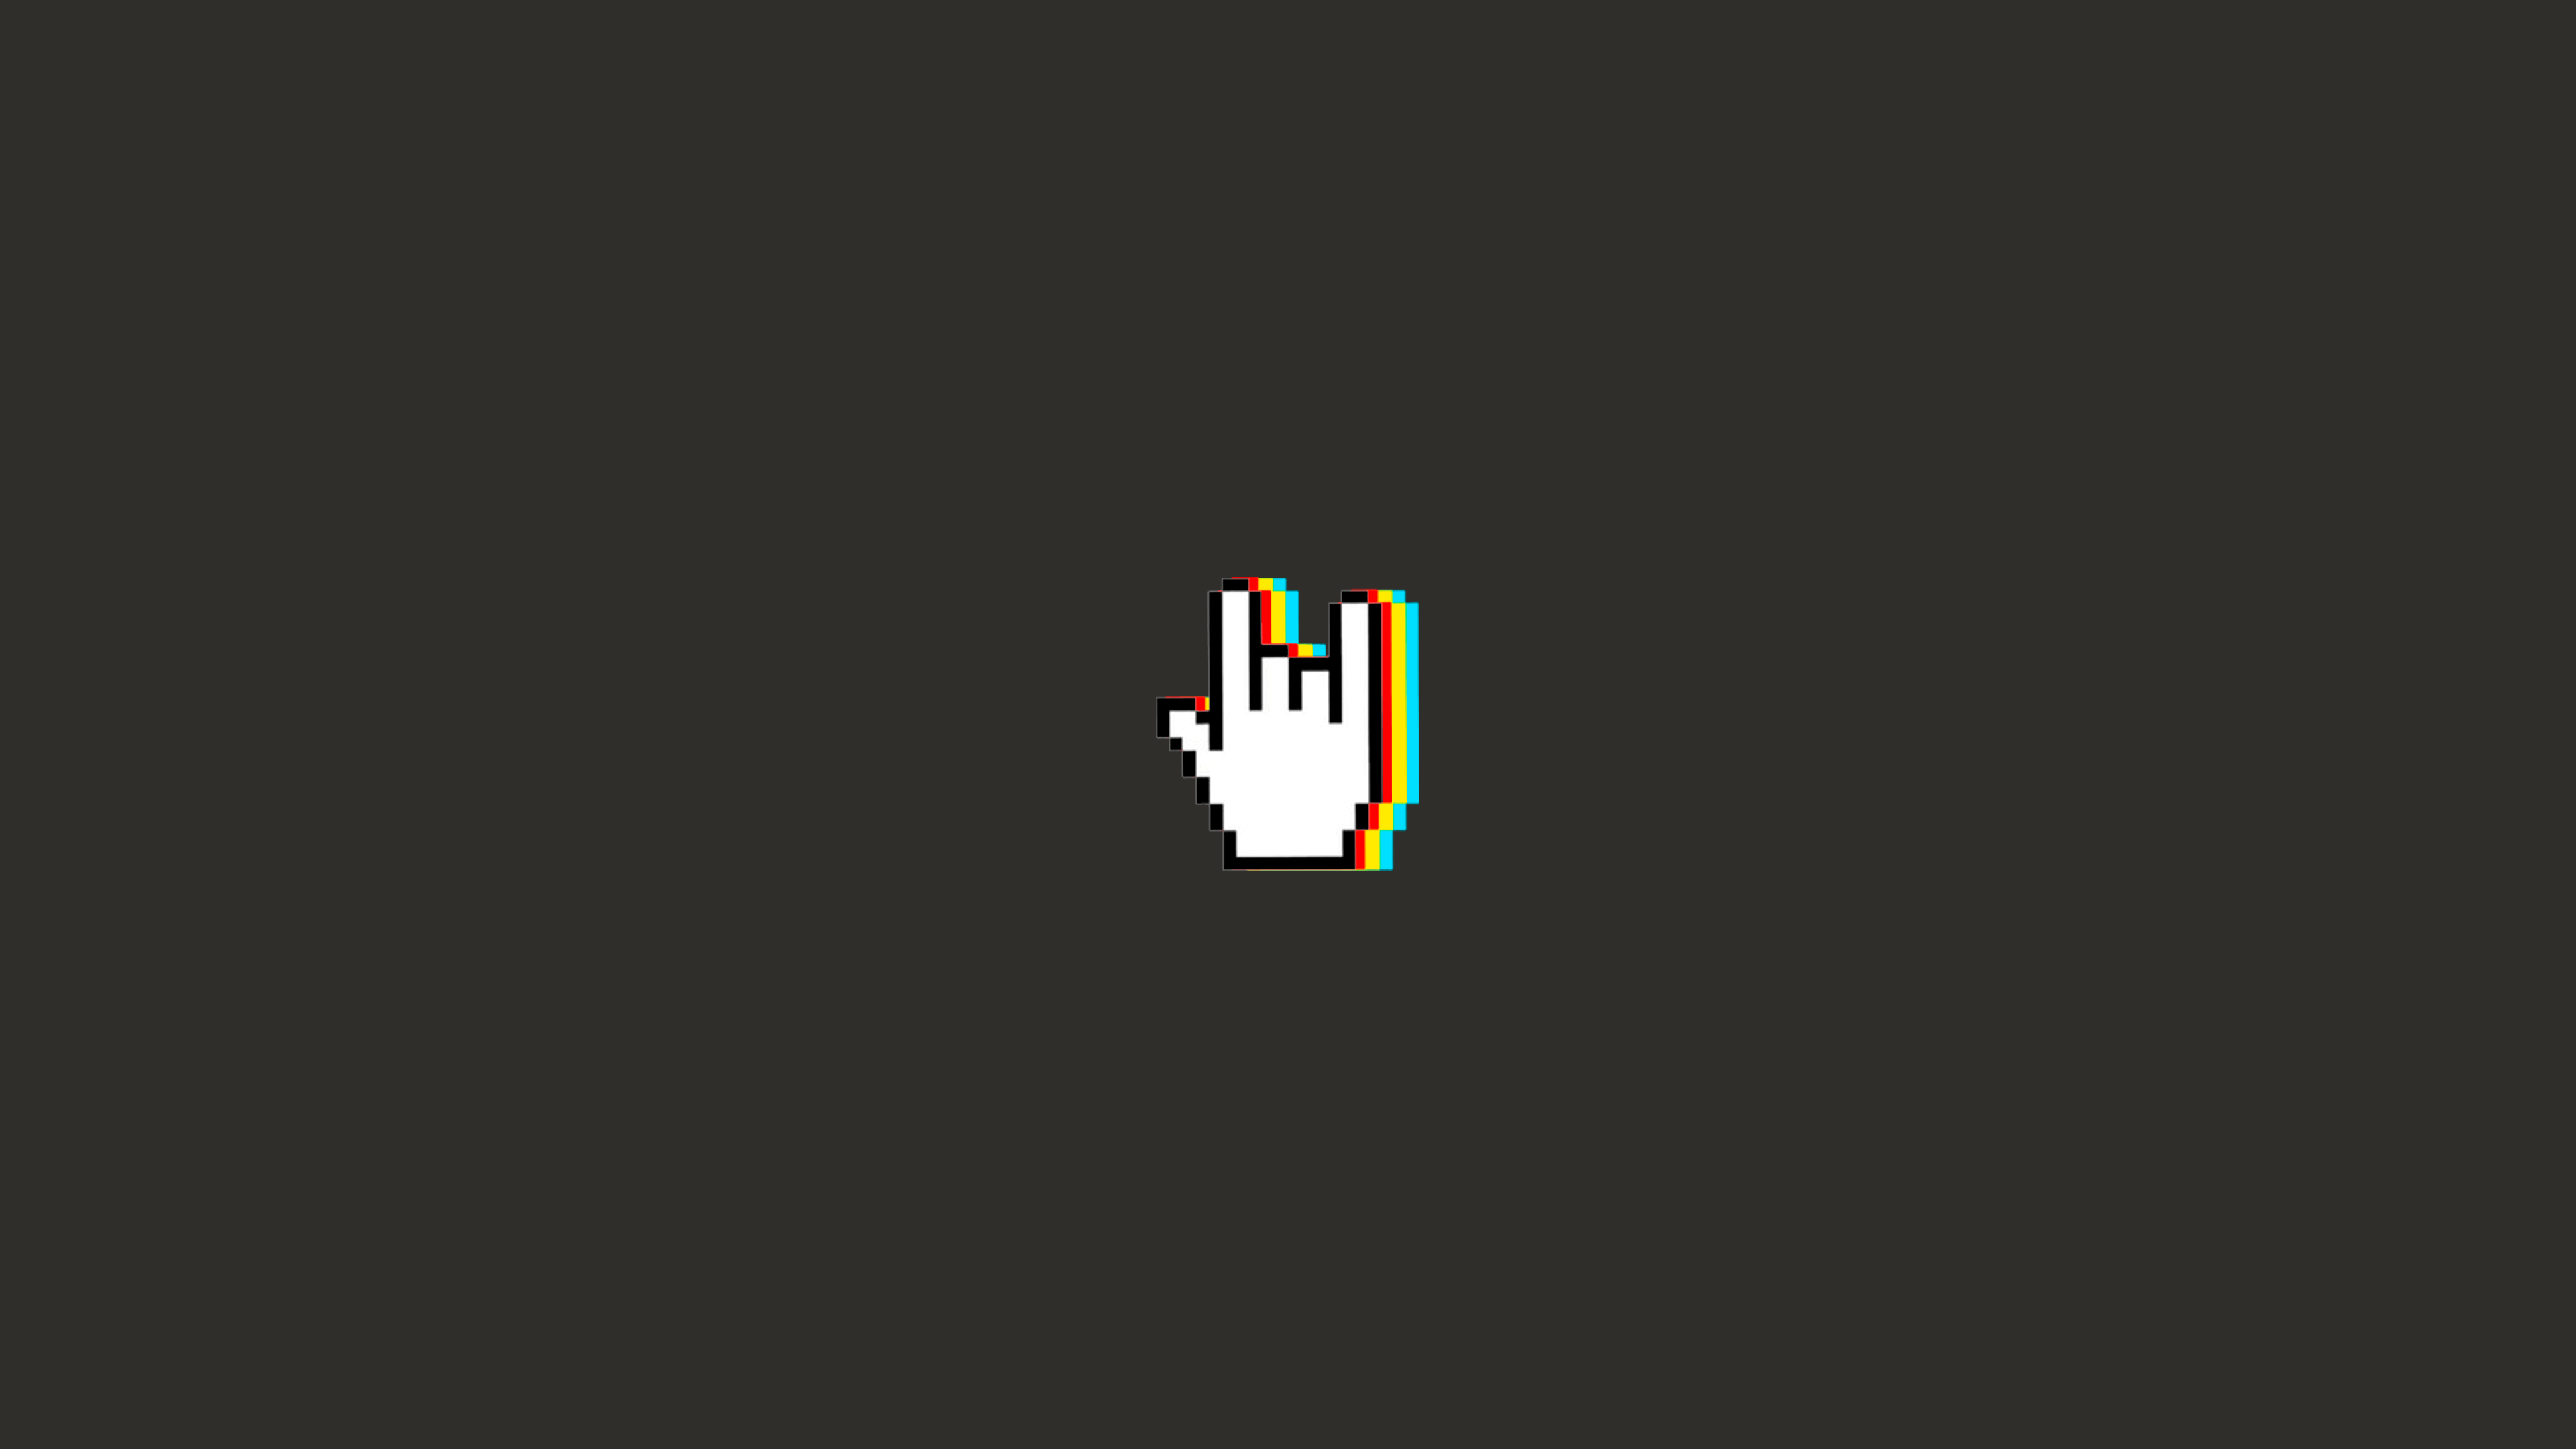 The image of a hand with one finger up - Minimalist, rock